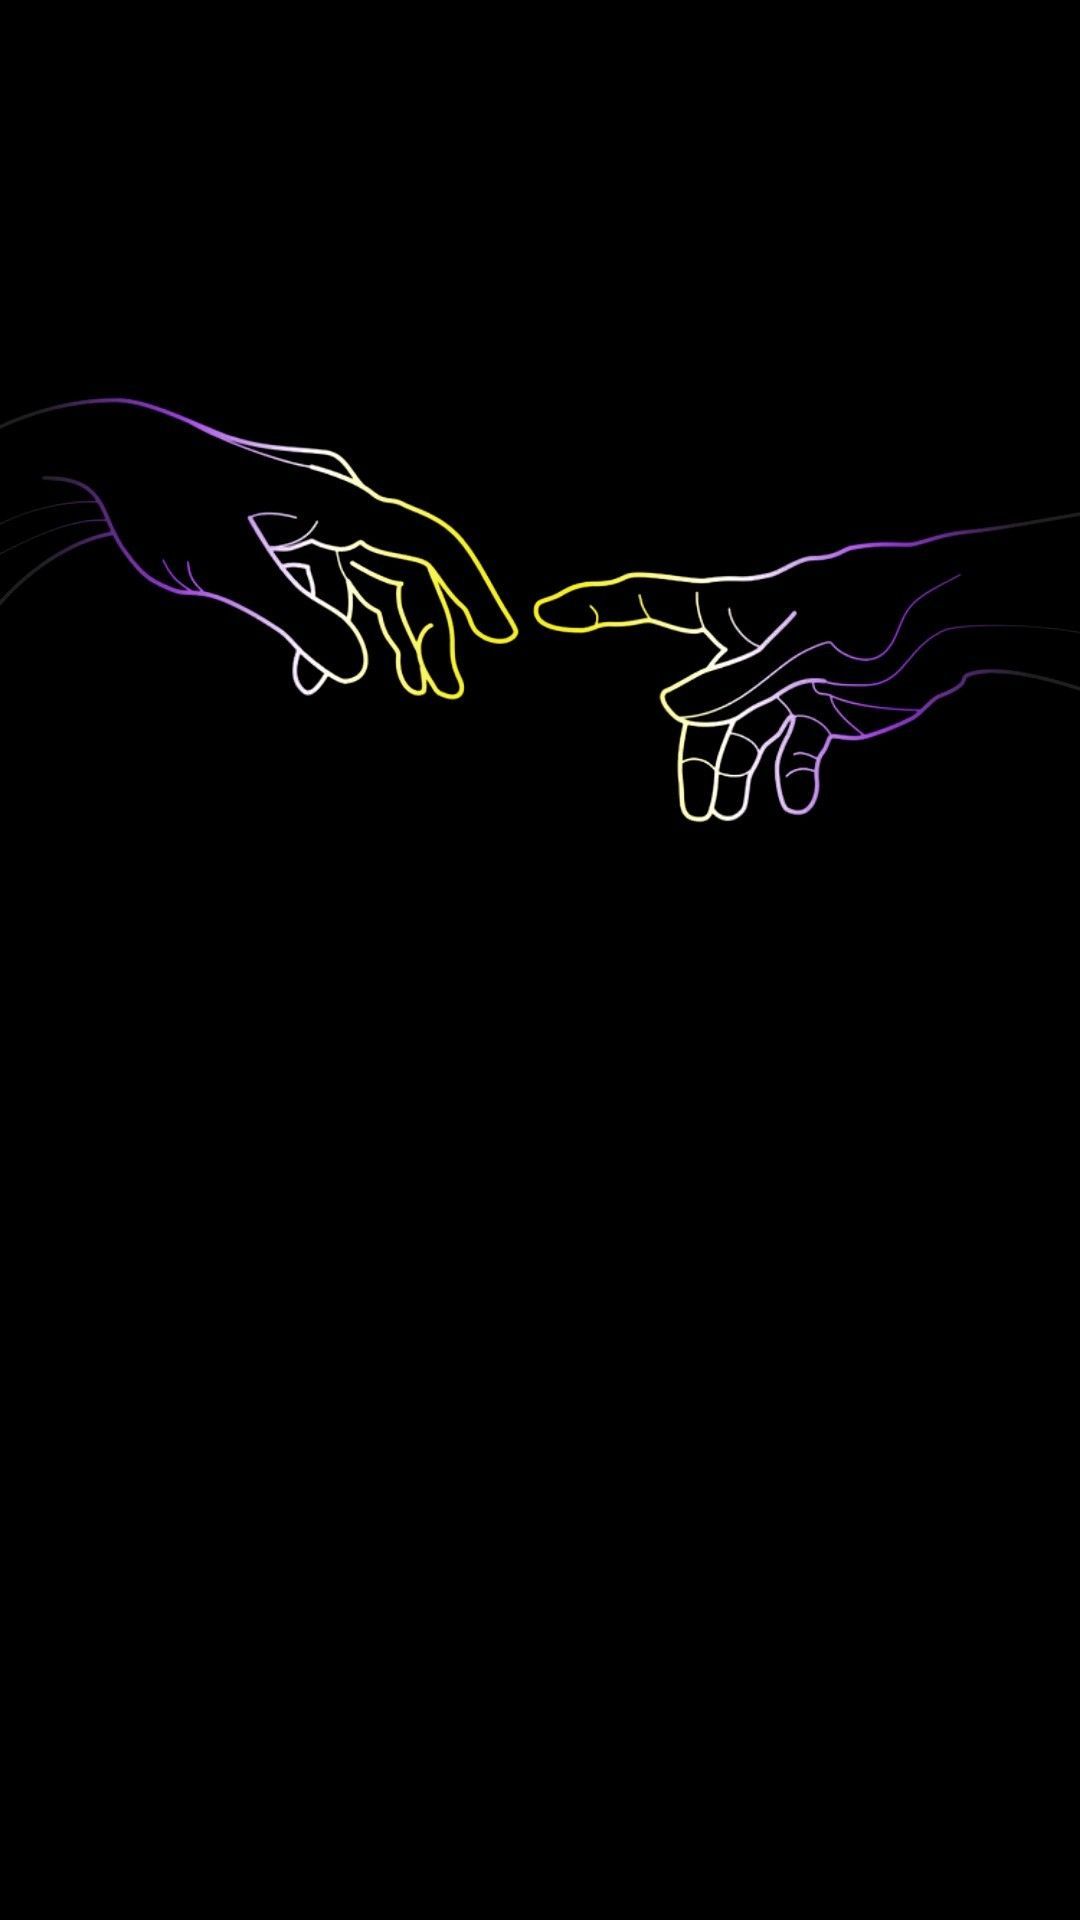 A hand reaching out to another one on black background - Non binary